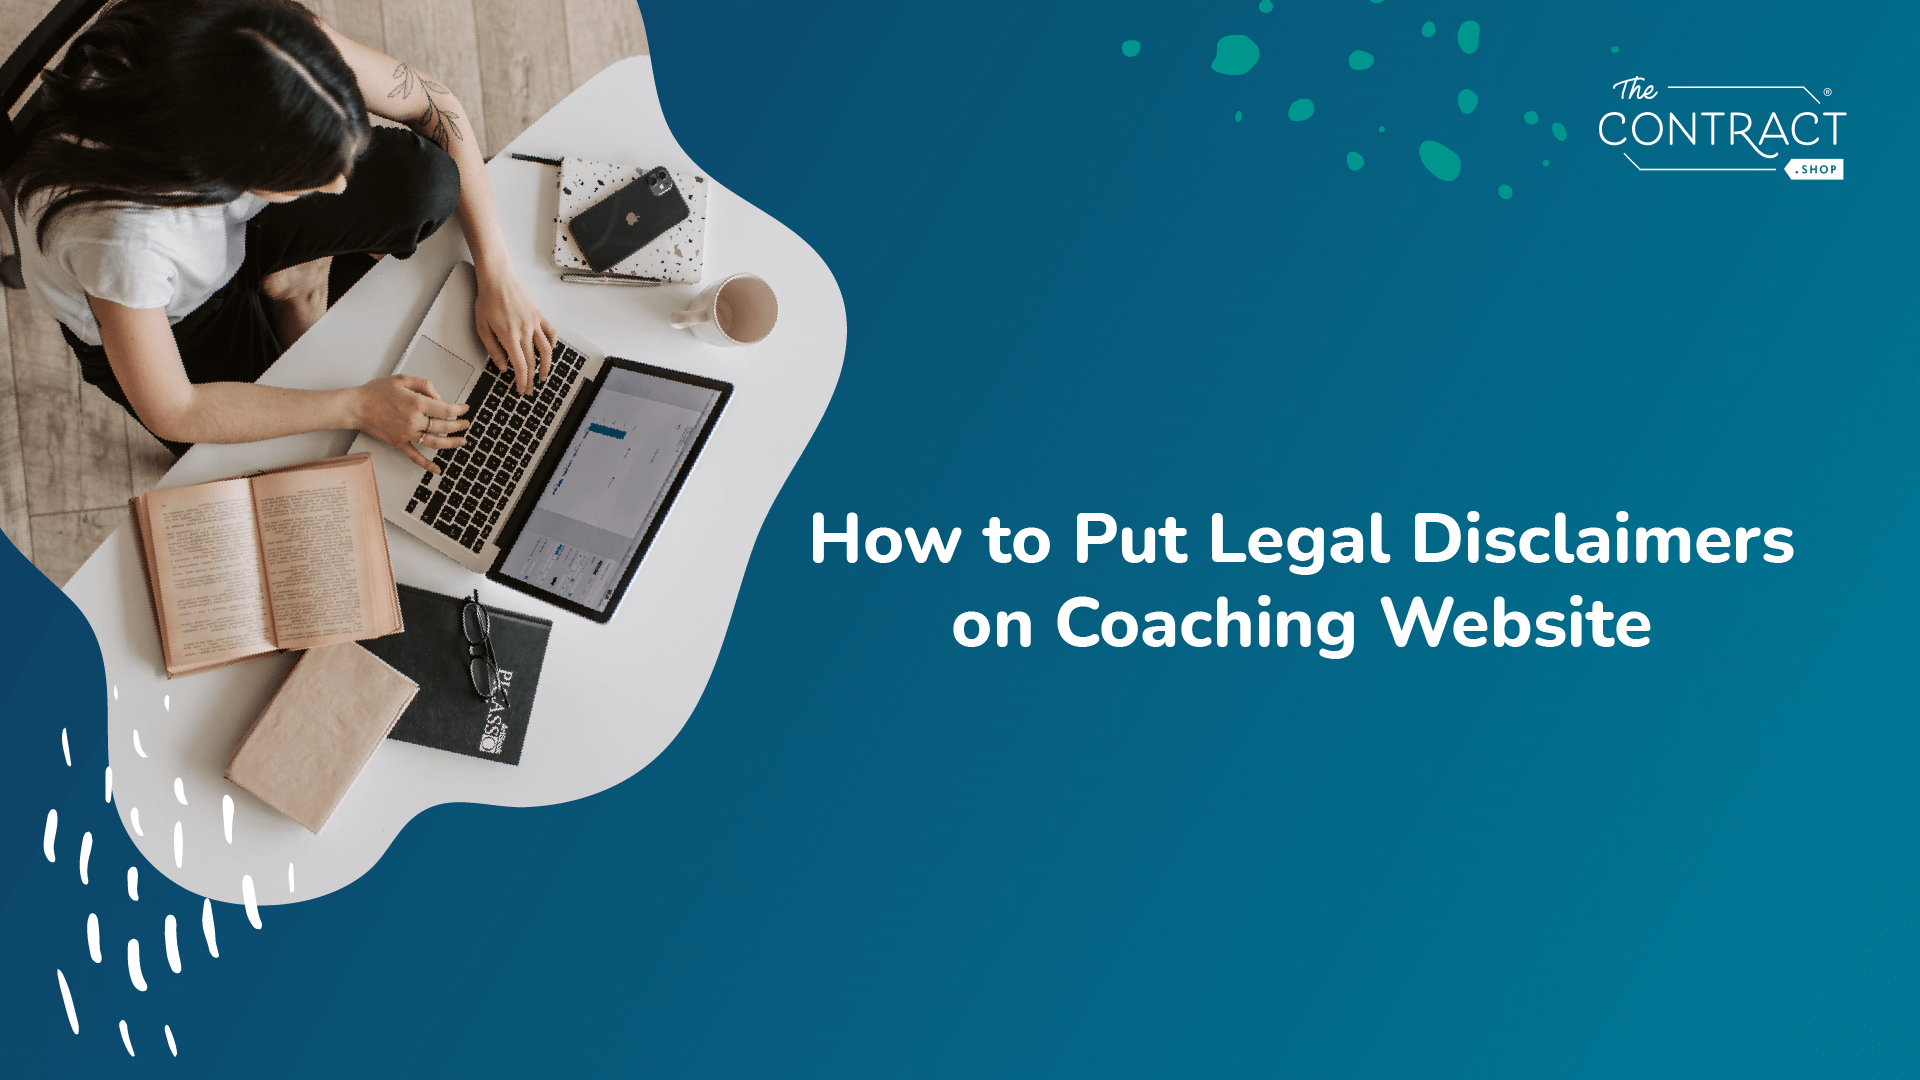 How to Put Legal Disclaimers on a Coaching Website